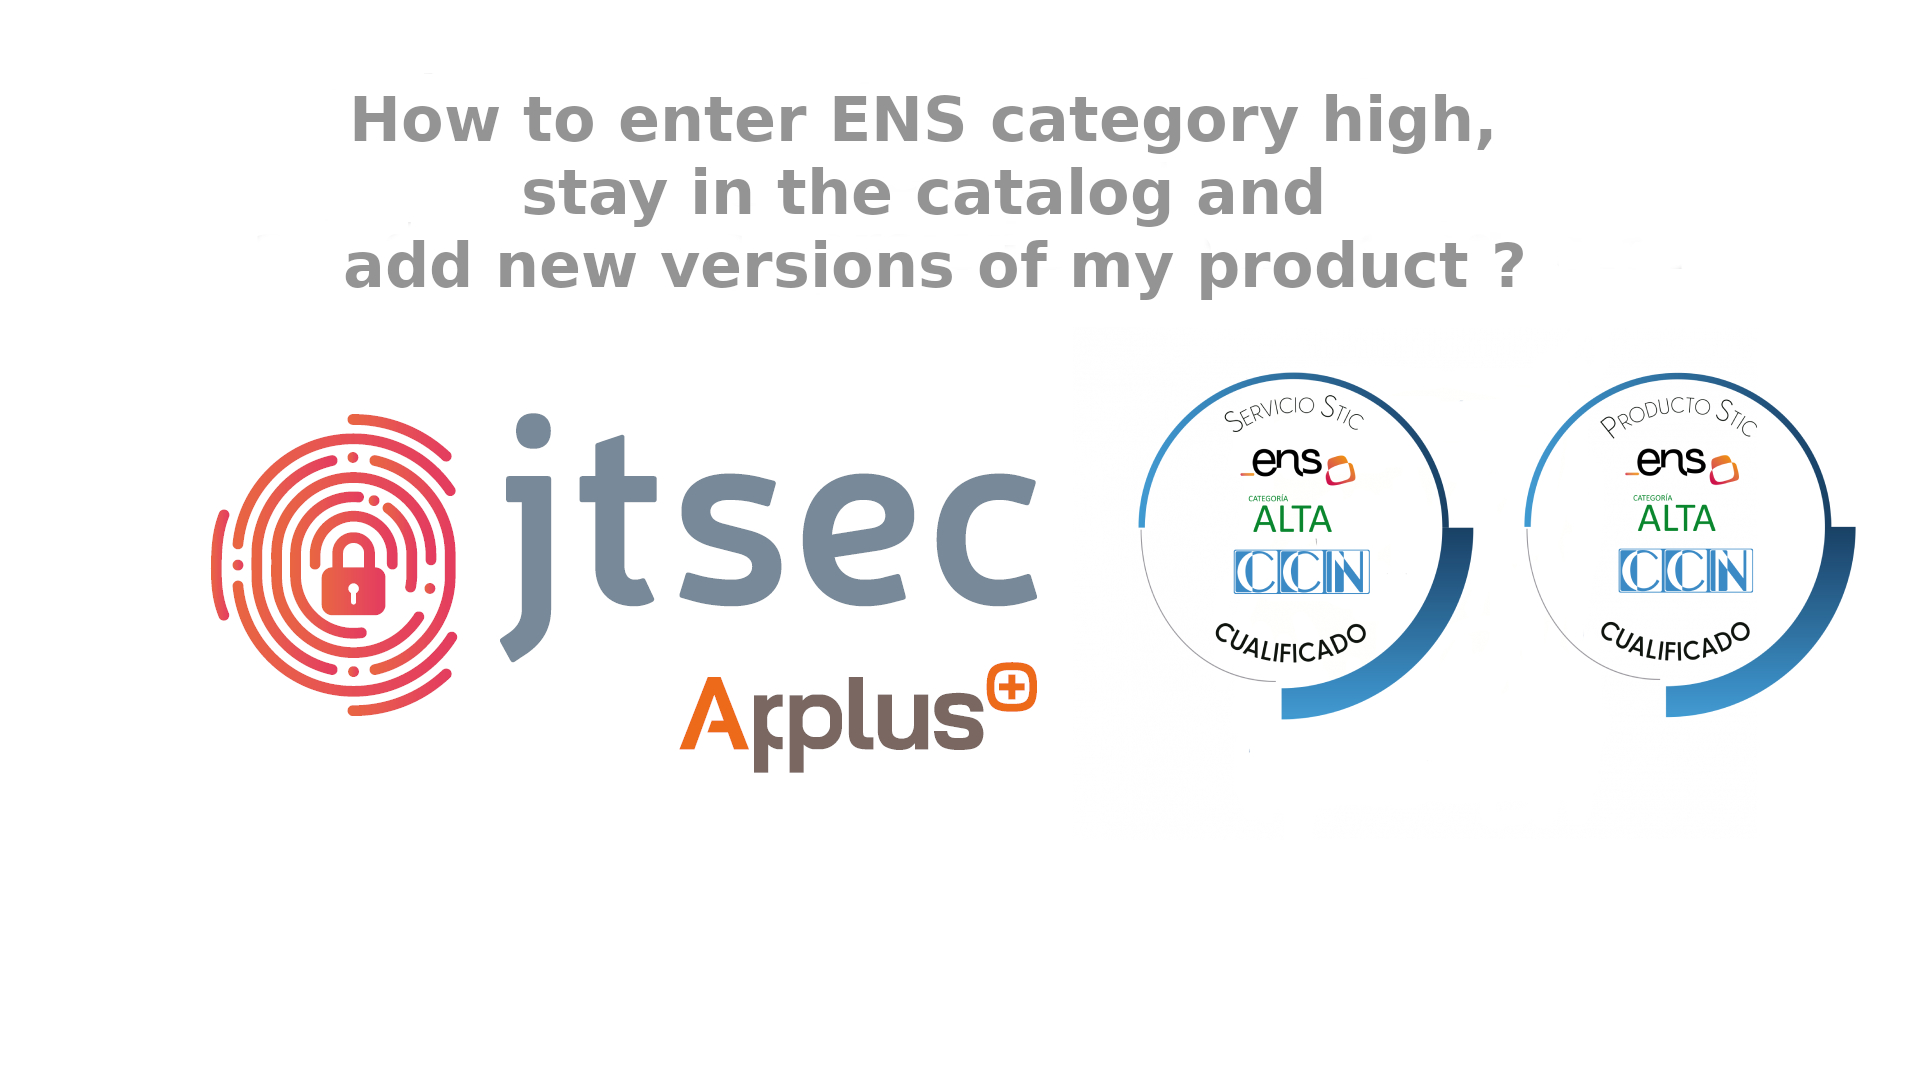 How to enter ENS category high, stay in the catalog and add new versions of my product